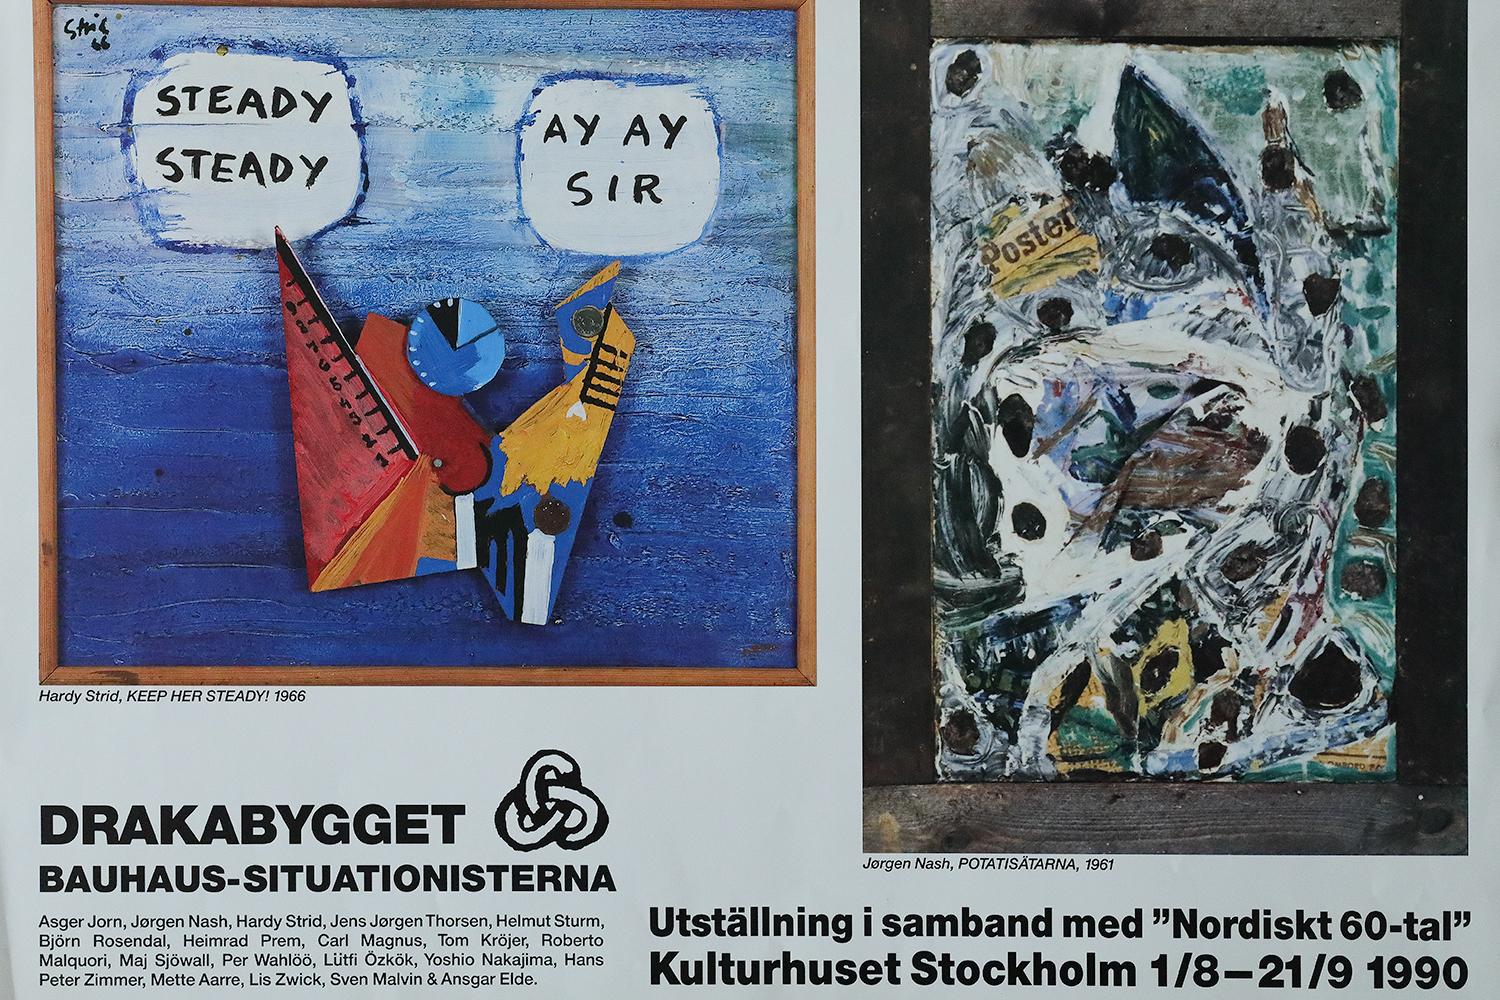 Poster from the Nordiskt 60-tal exhibition, which took place on 1/08 - 21/09 1990 at the Kulturhuset cultural center in Stockholm. It presented the work of artists of the Situationism movement. The poster uses works by Scandinavian artists Hardy